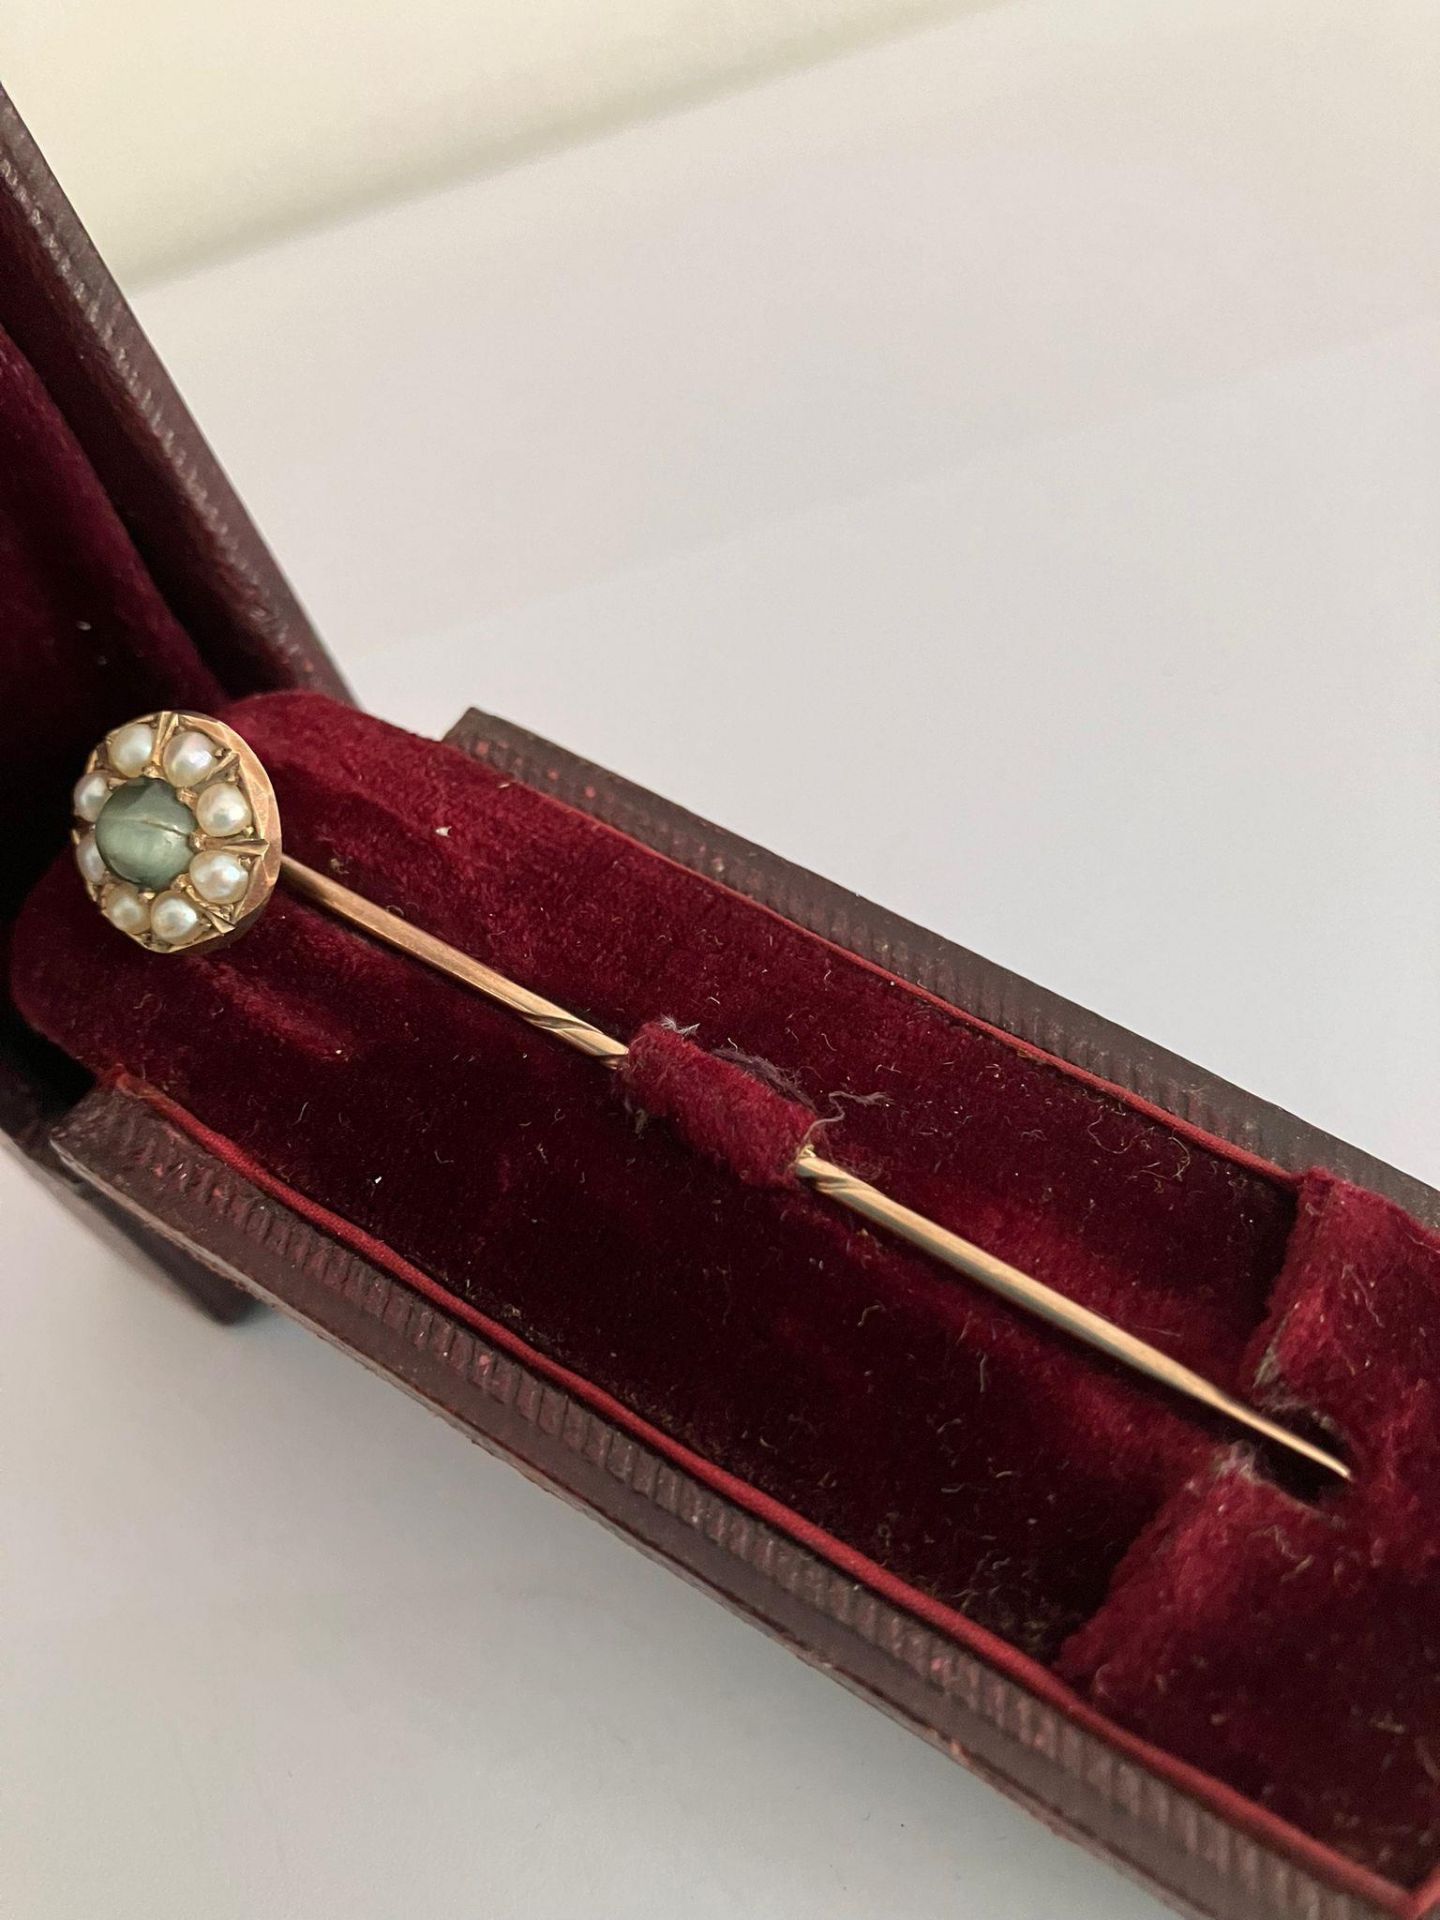 Antique GOLD TIE PIN Set with AGATE and PEARLS. Complete with original case. 2.5 grams. - Image 2 of 4